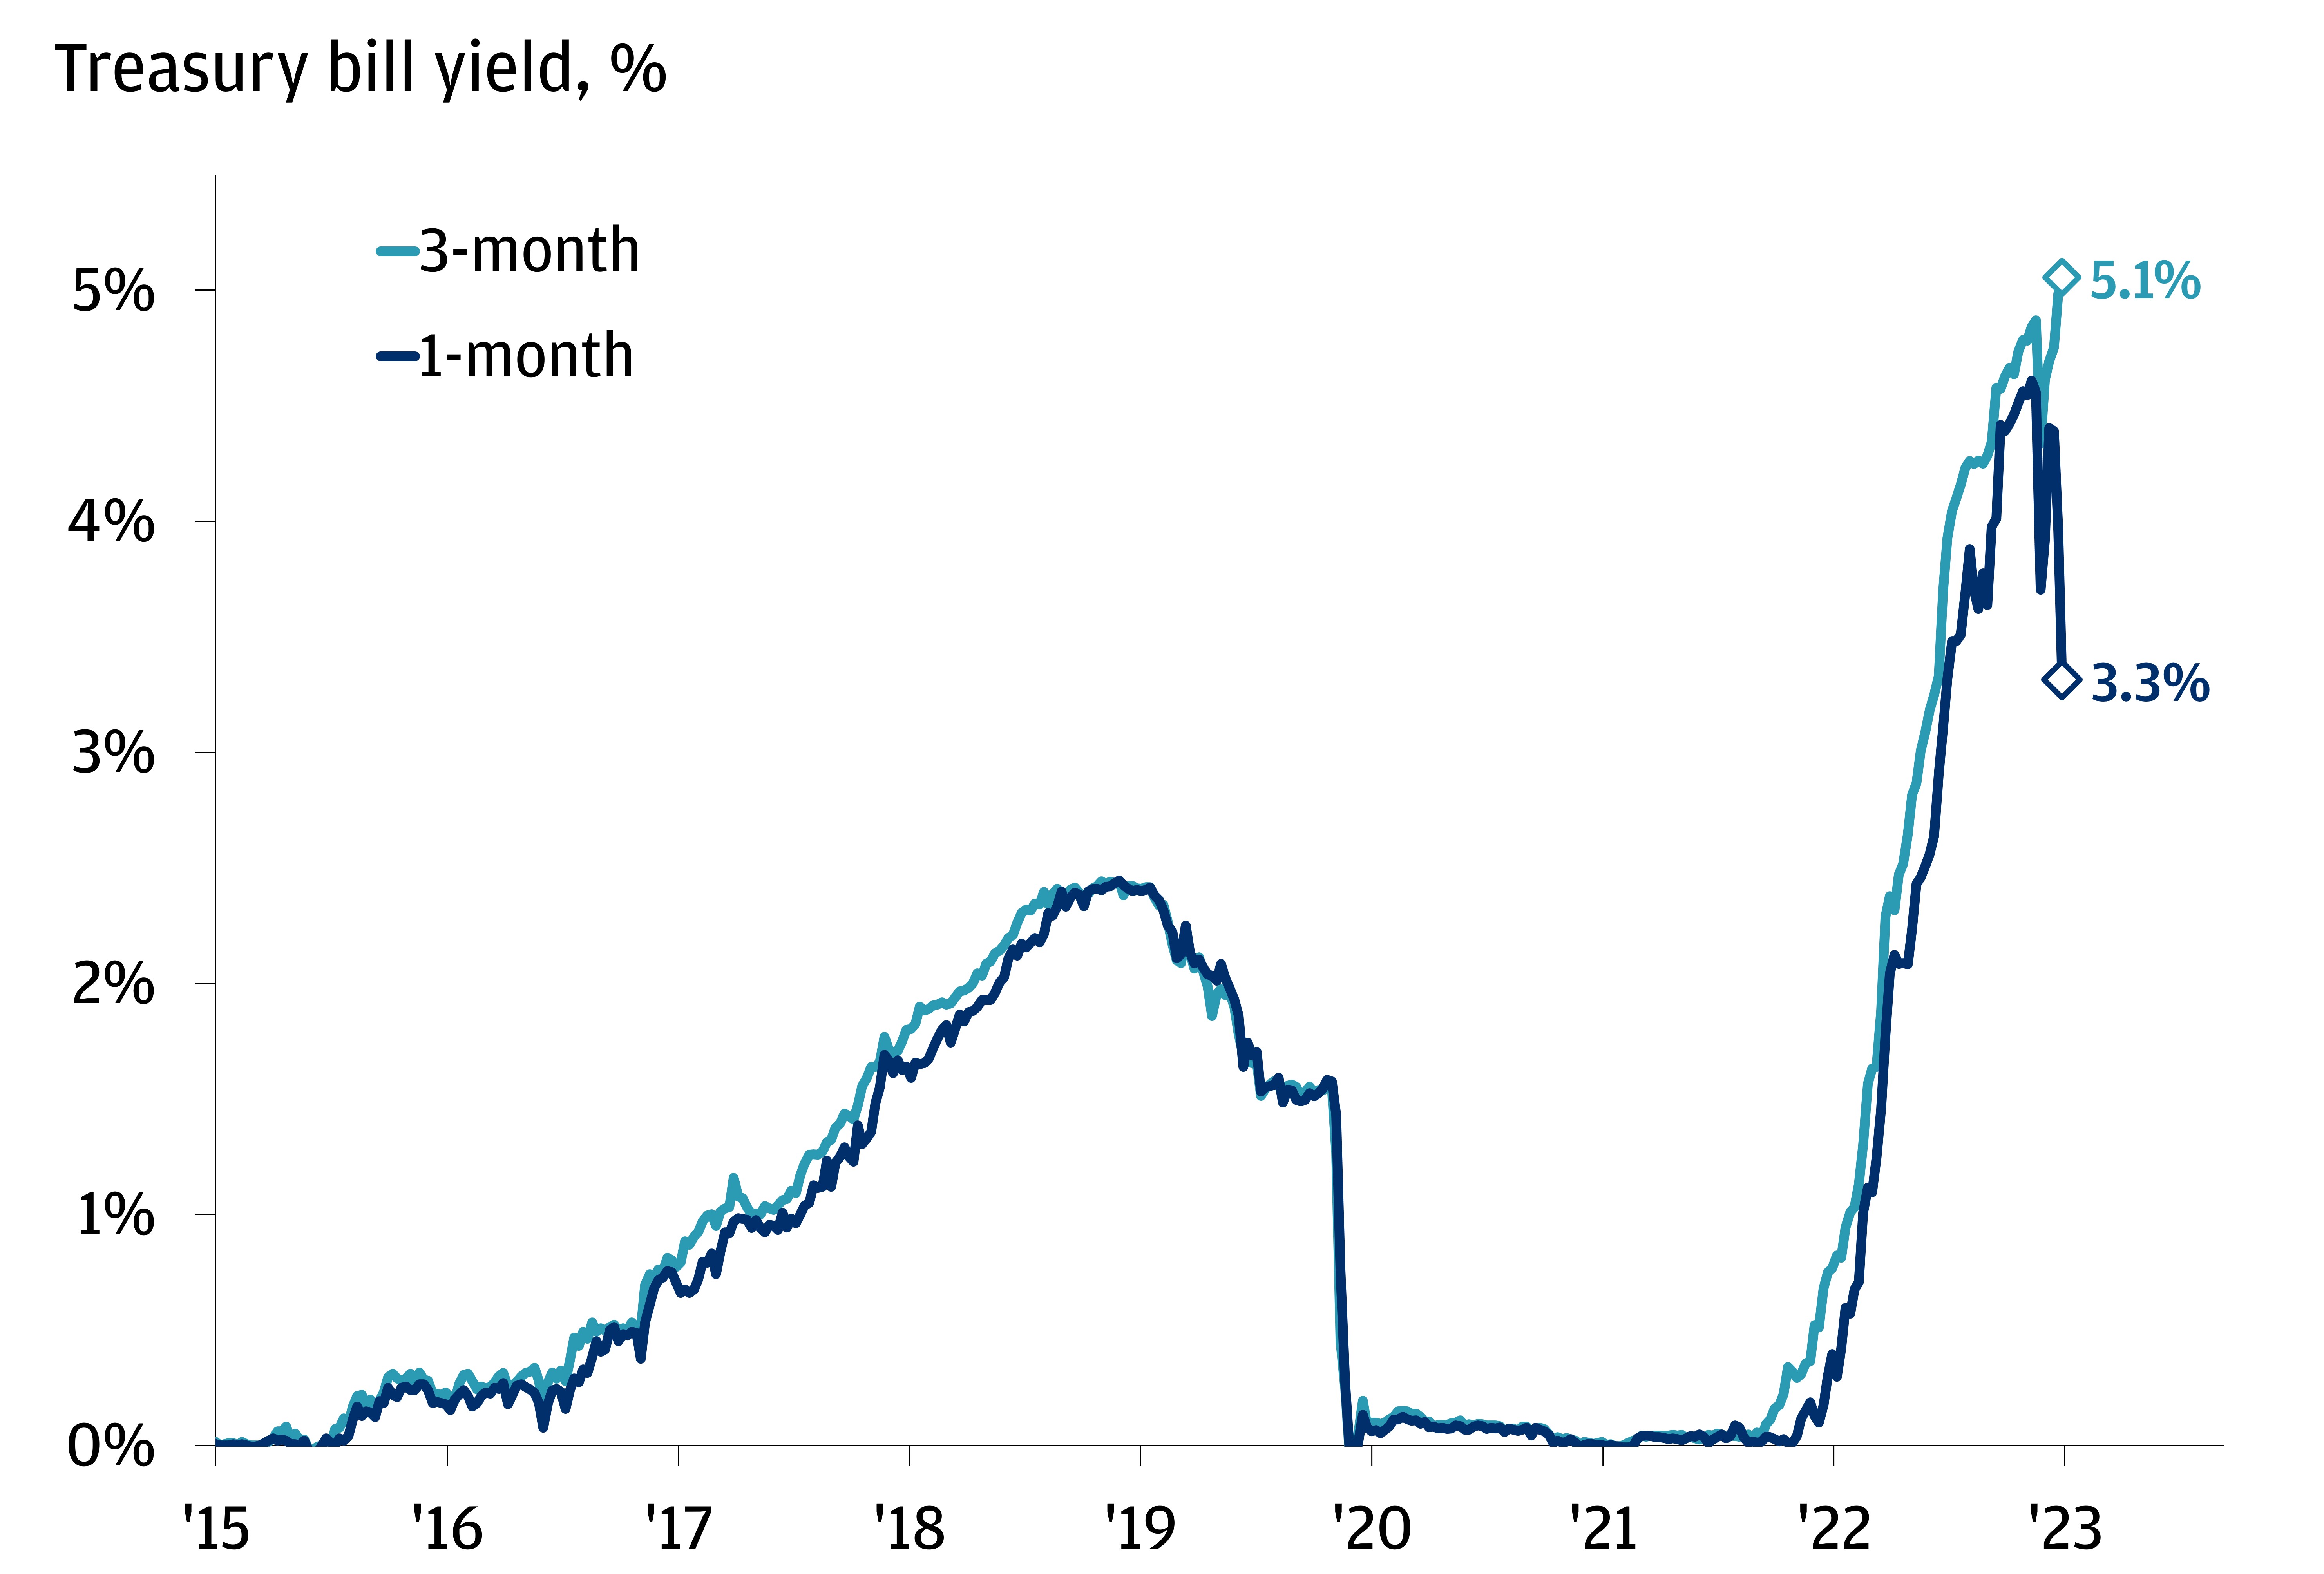 The chart describes 1-month and 3-month Treasury bill yields on two lines.